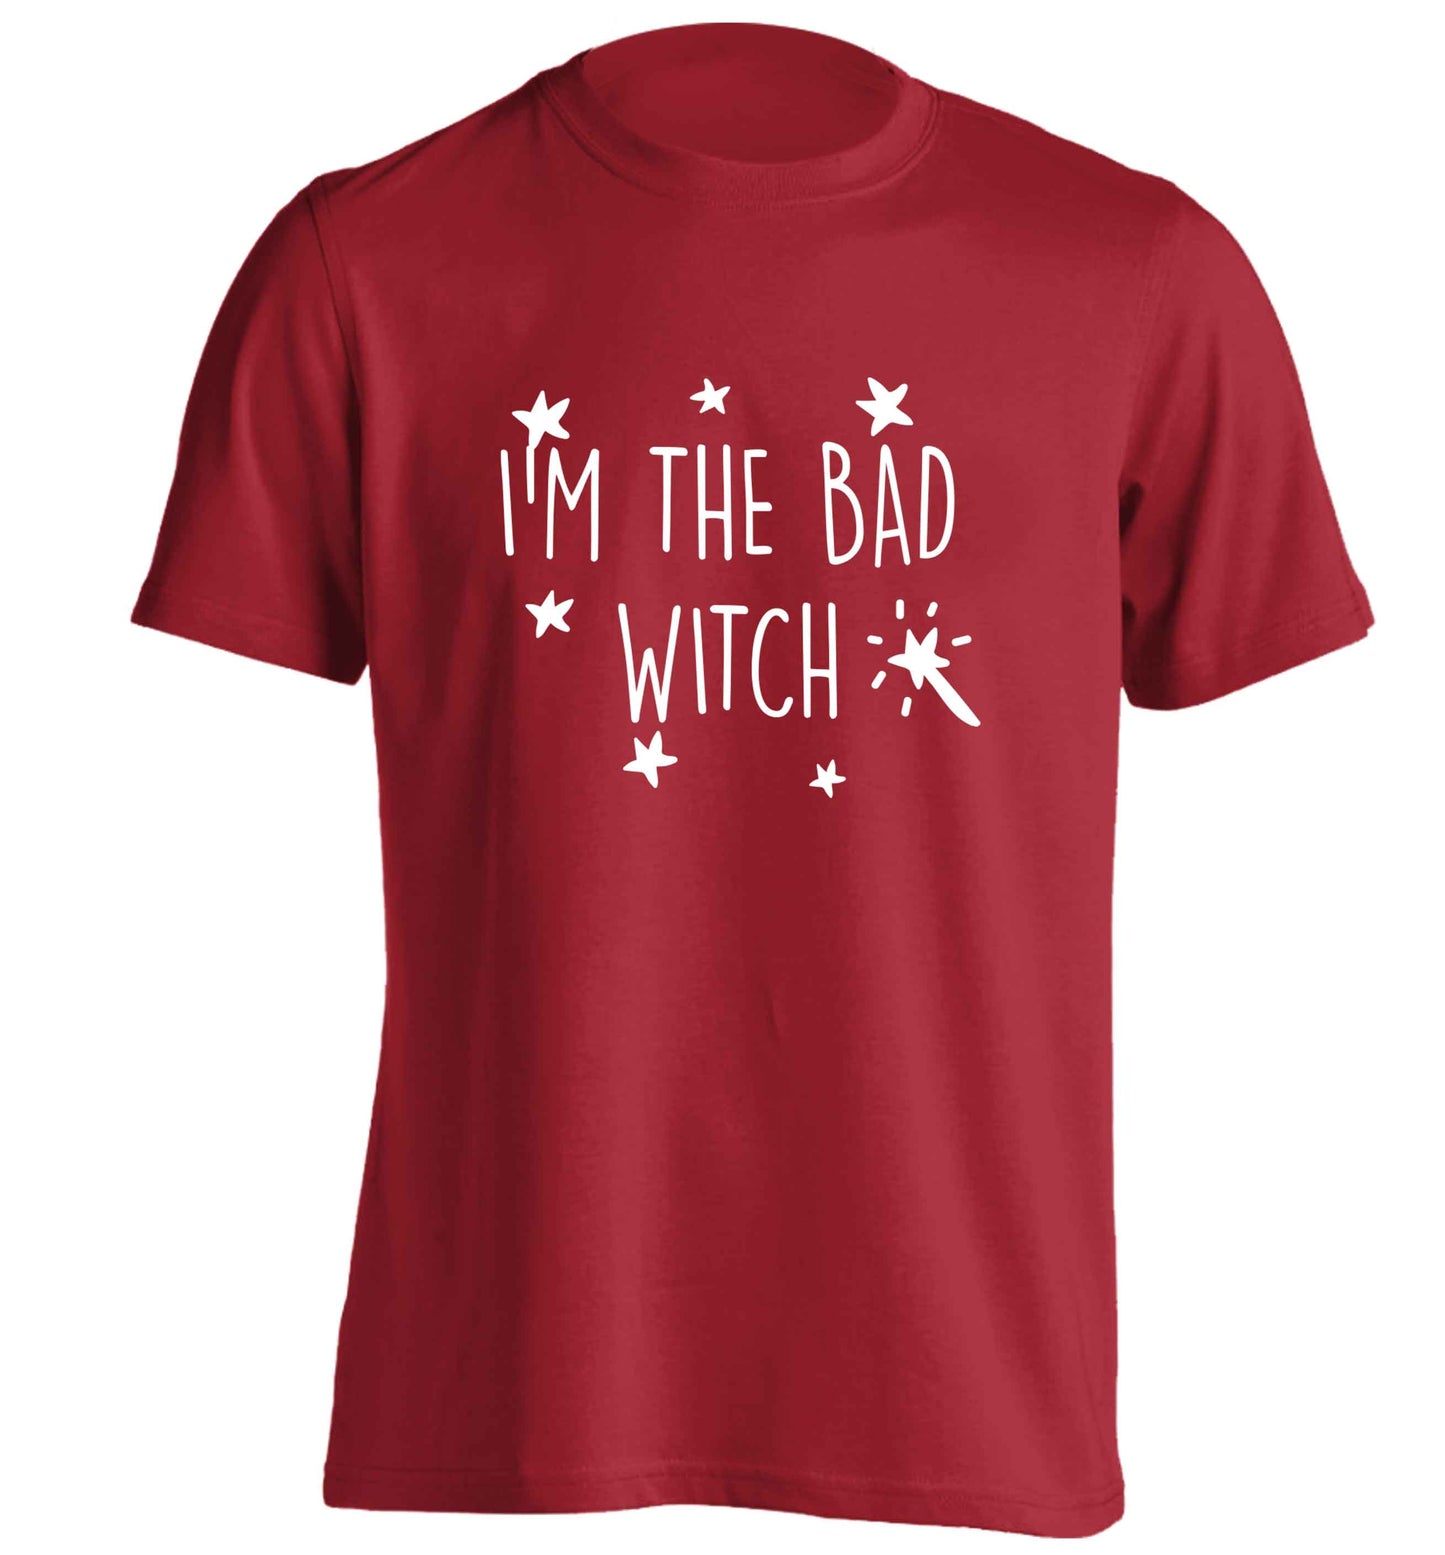 Bad witch adults unisex red Tshirt 2XL